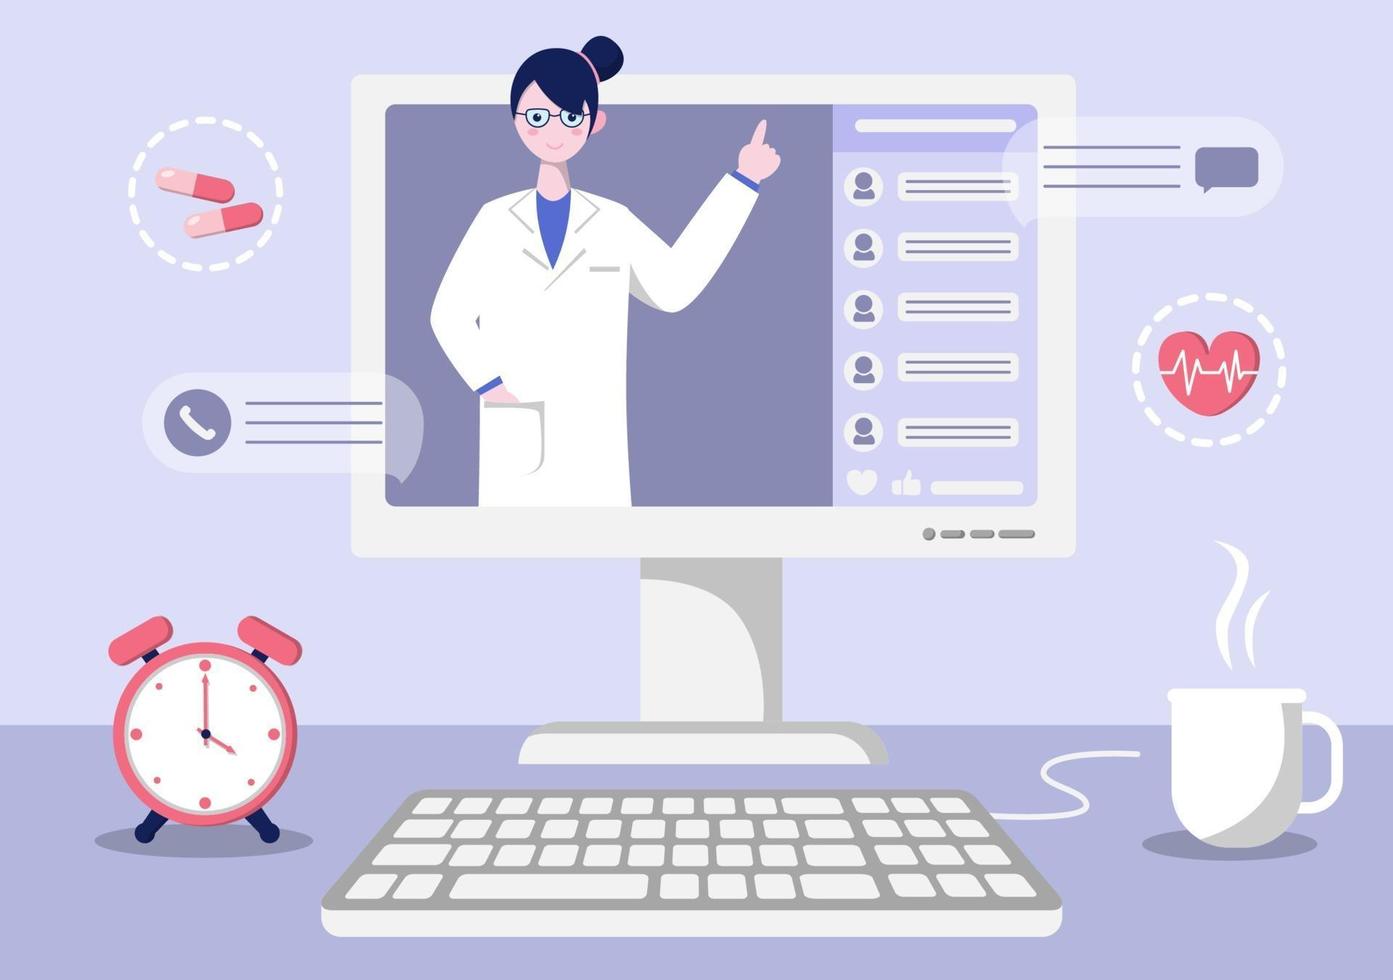 Online Healthcare and Medical Concept of Doctor Vector Illustration, Medicine Consultation and Treatment via Application of Smartphone or Computer Connected Internet Clinic